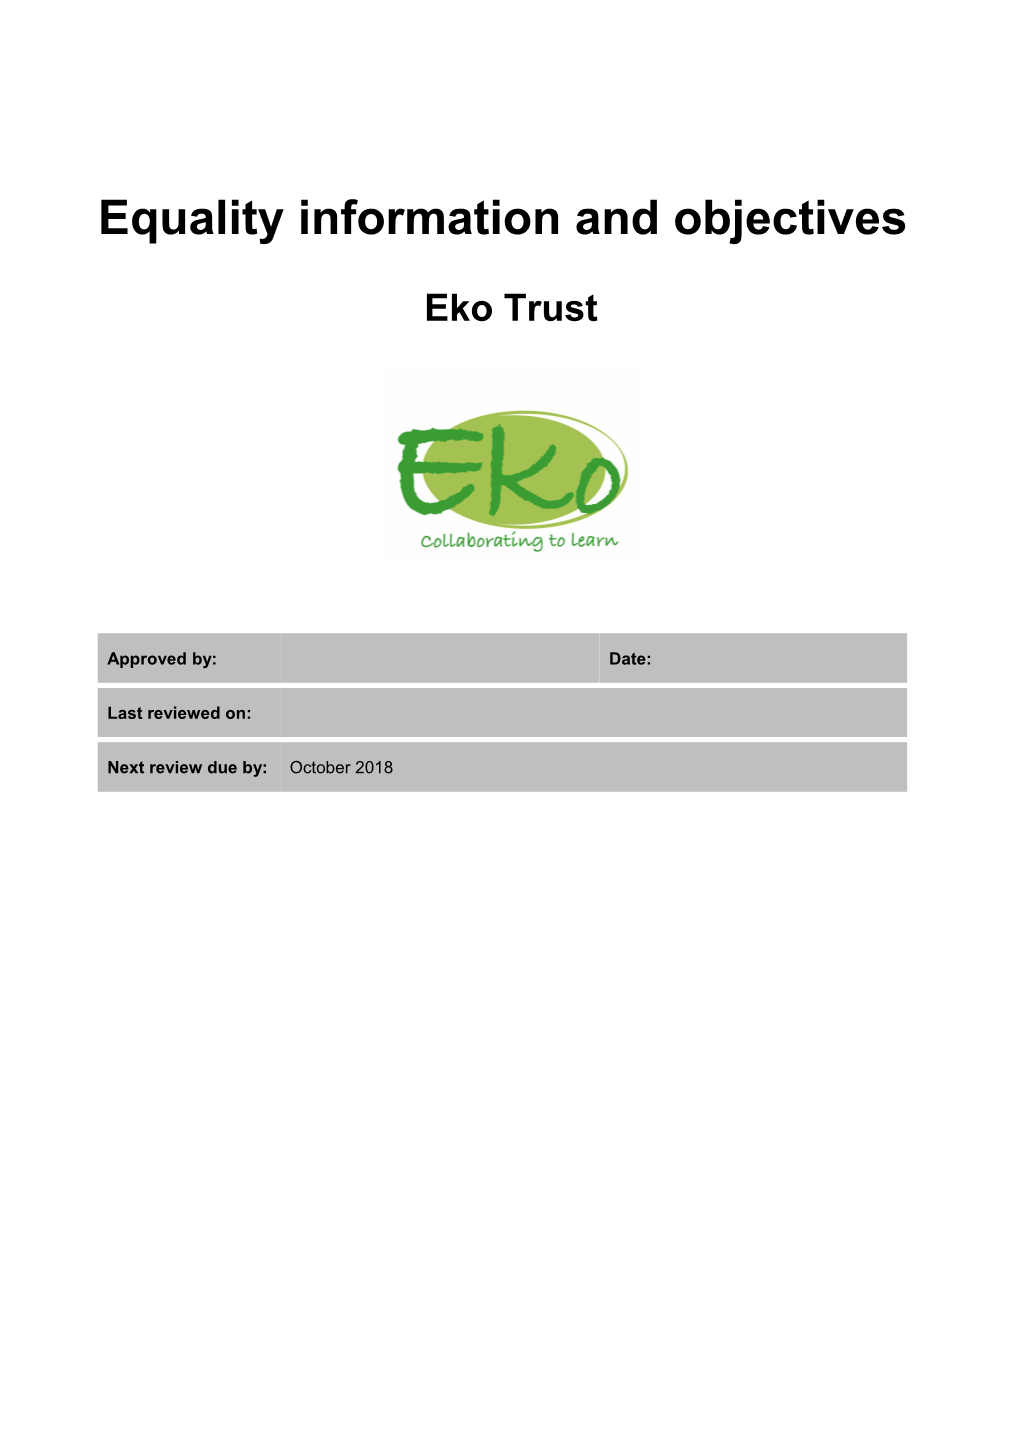 Equality Information and Objectives